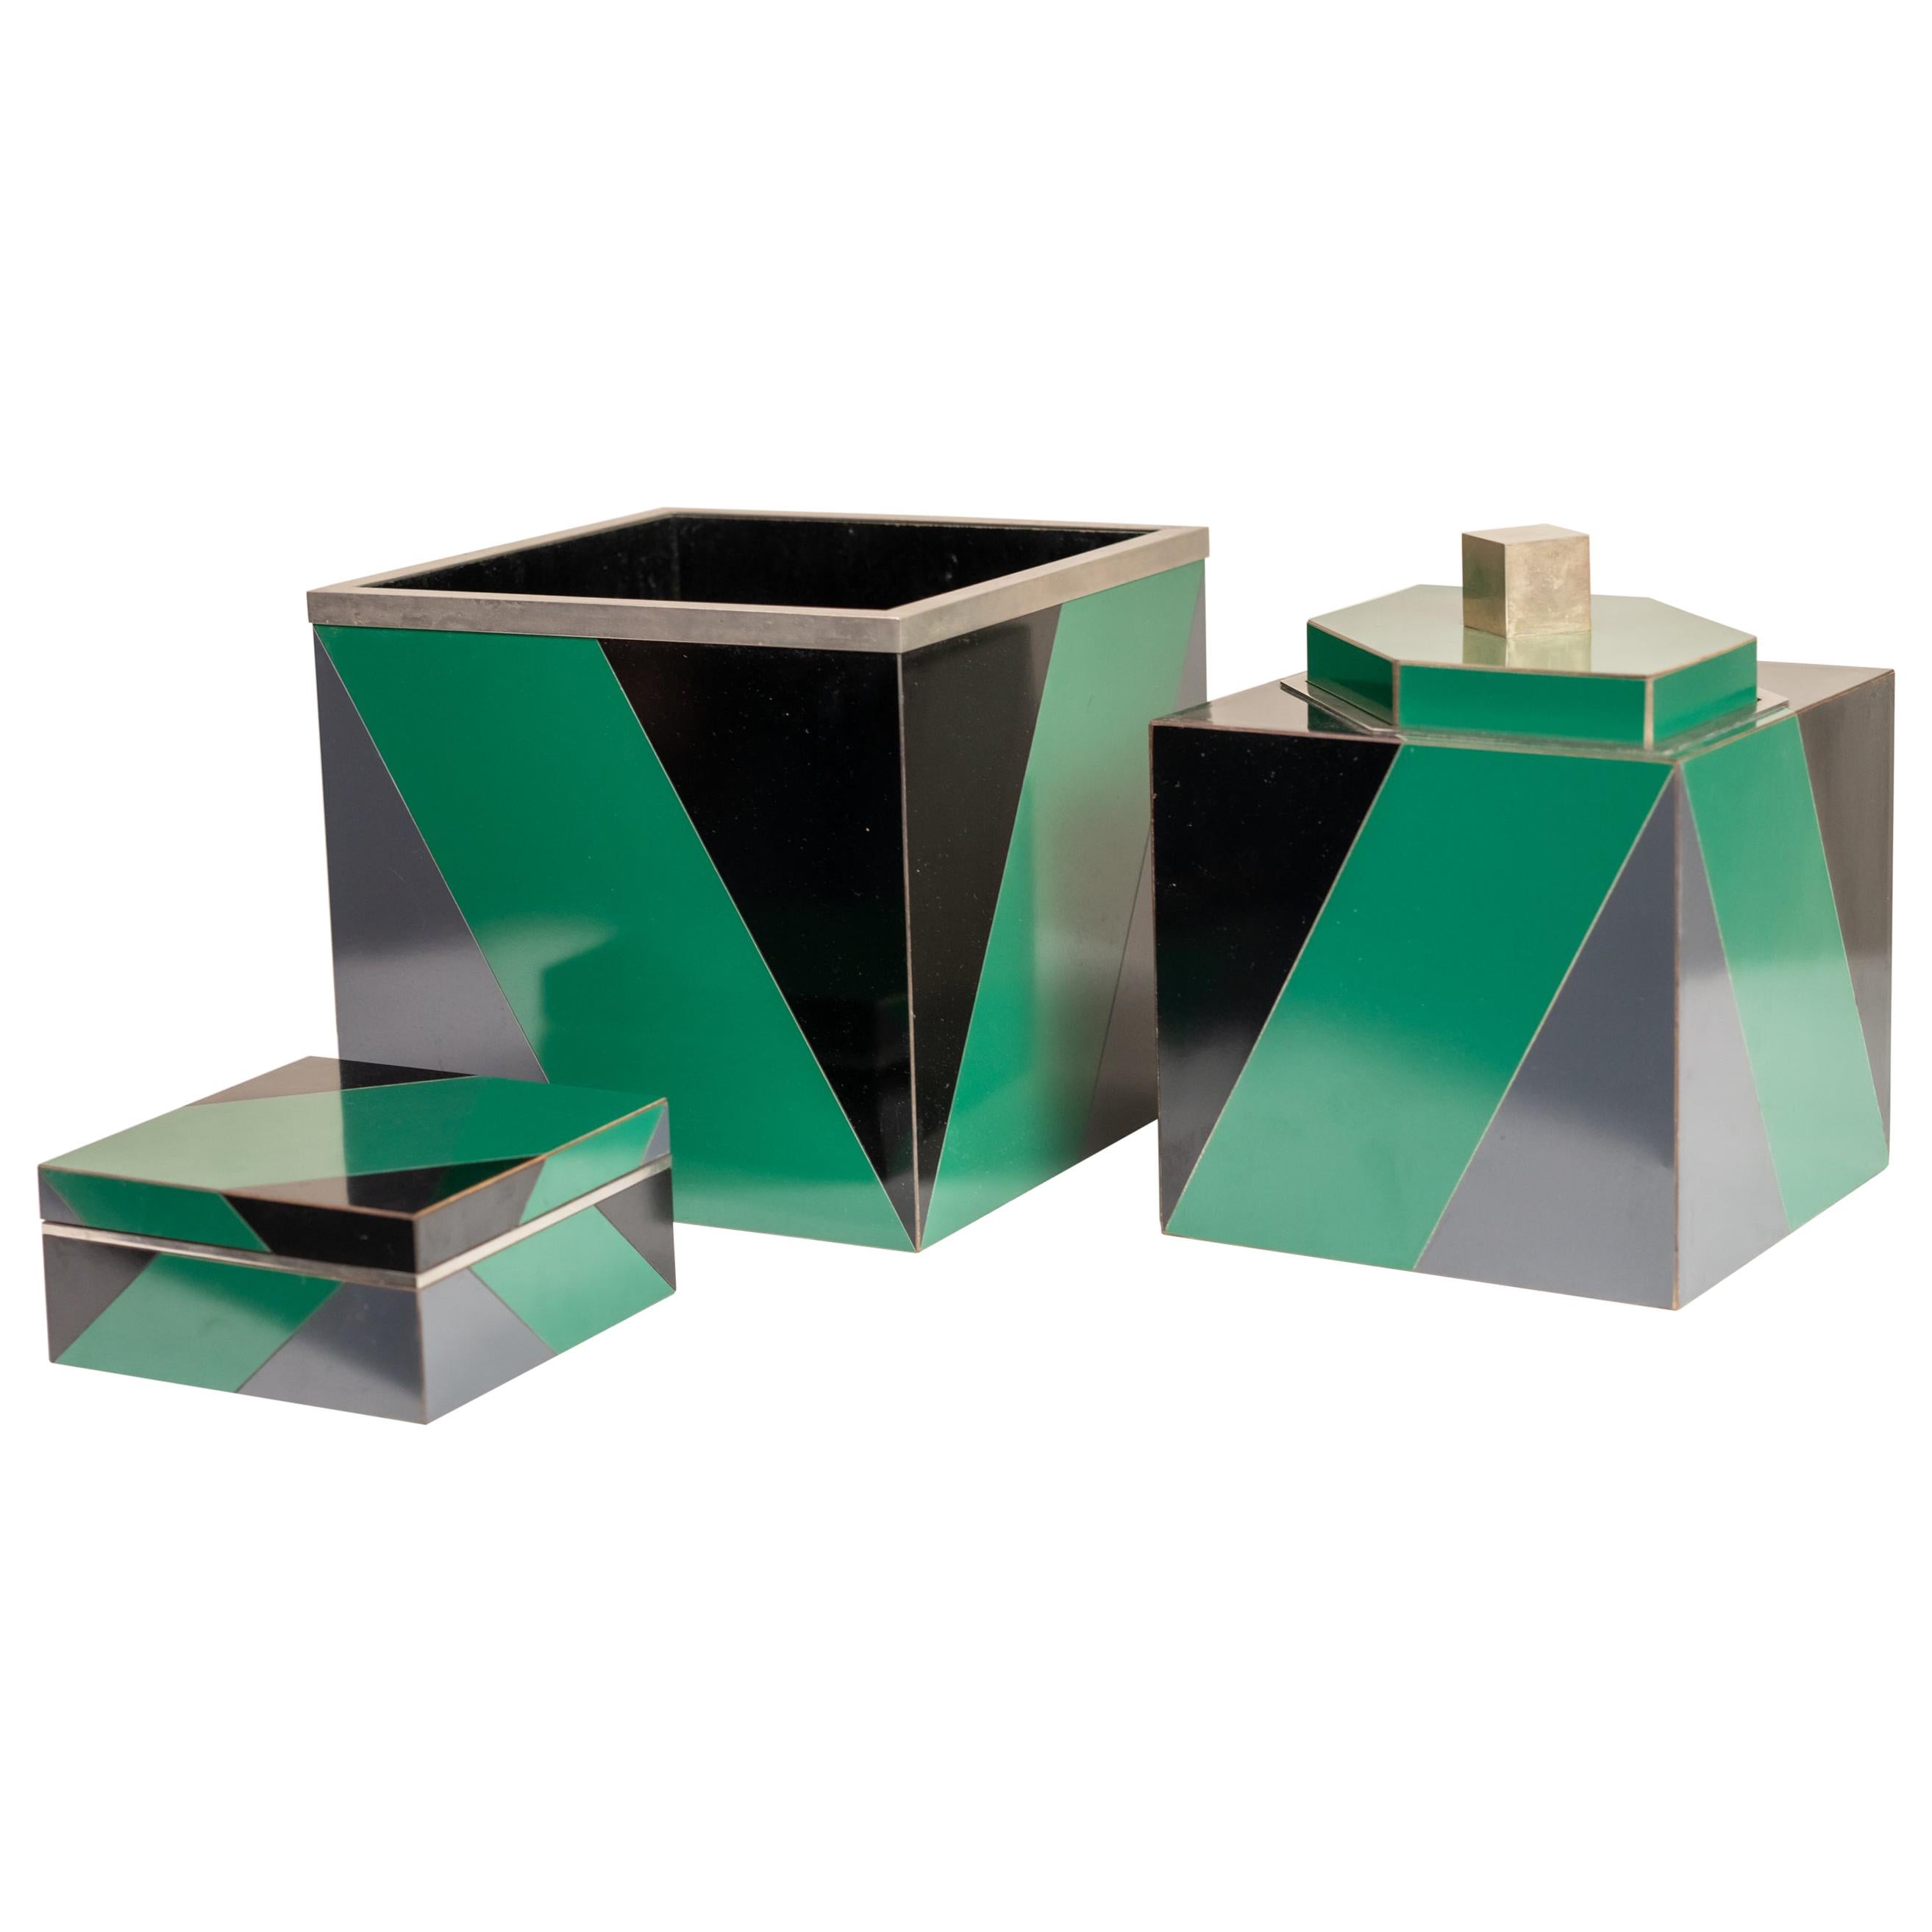 Set of 3 Polychrome and Laminated and Polished Nickel Art Deco Style Boxes